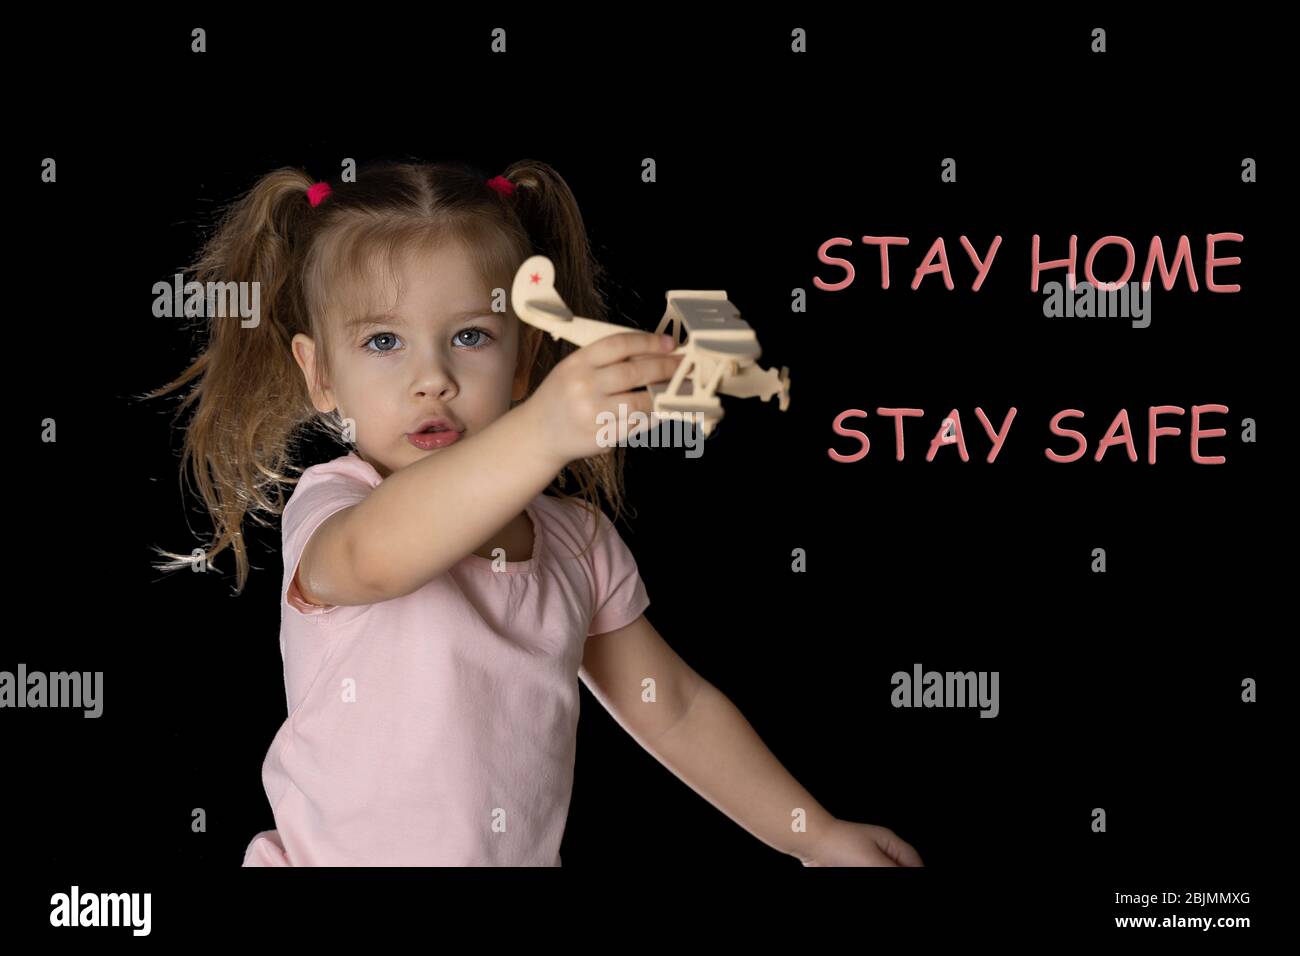 stay home save life text on dark background. sitting next to the floor is a little girl in jeans and playing with a wooden airplane. the need to stay Stock Photo